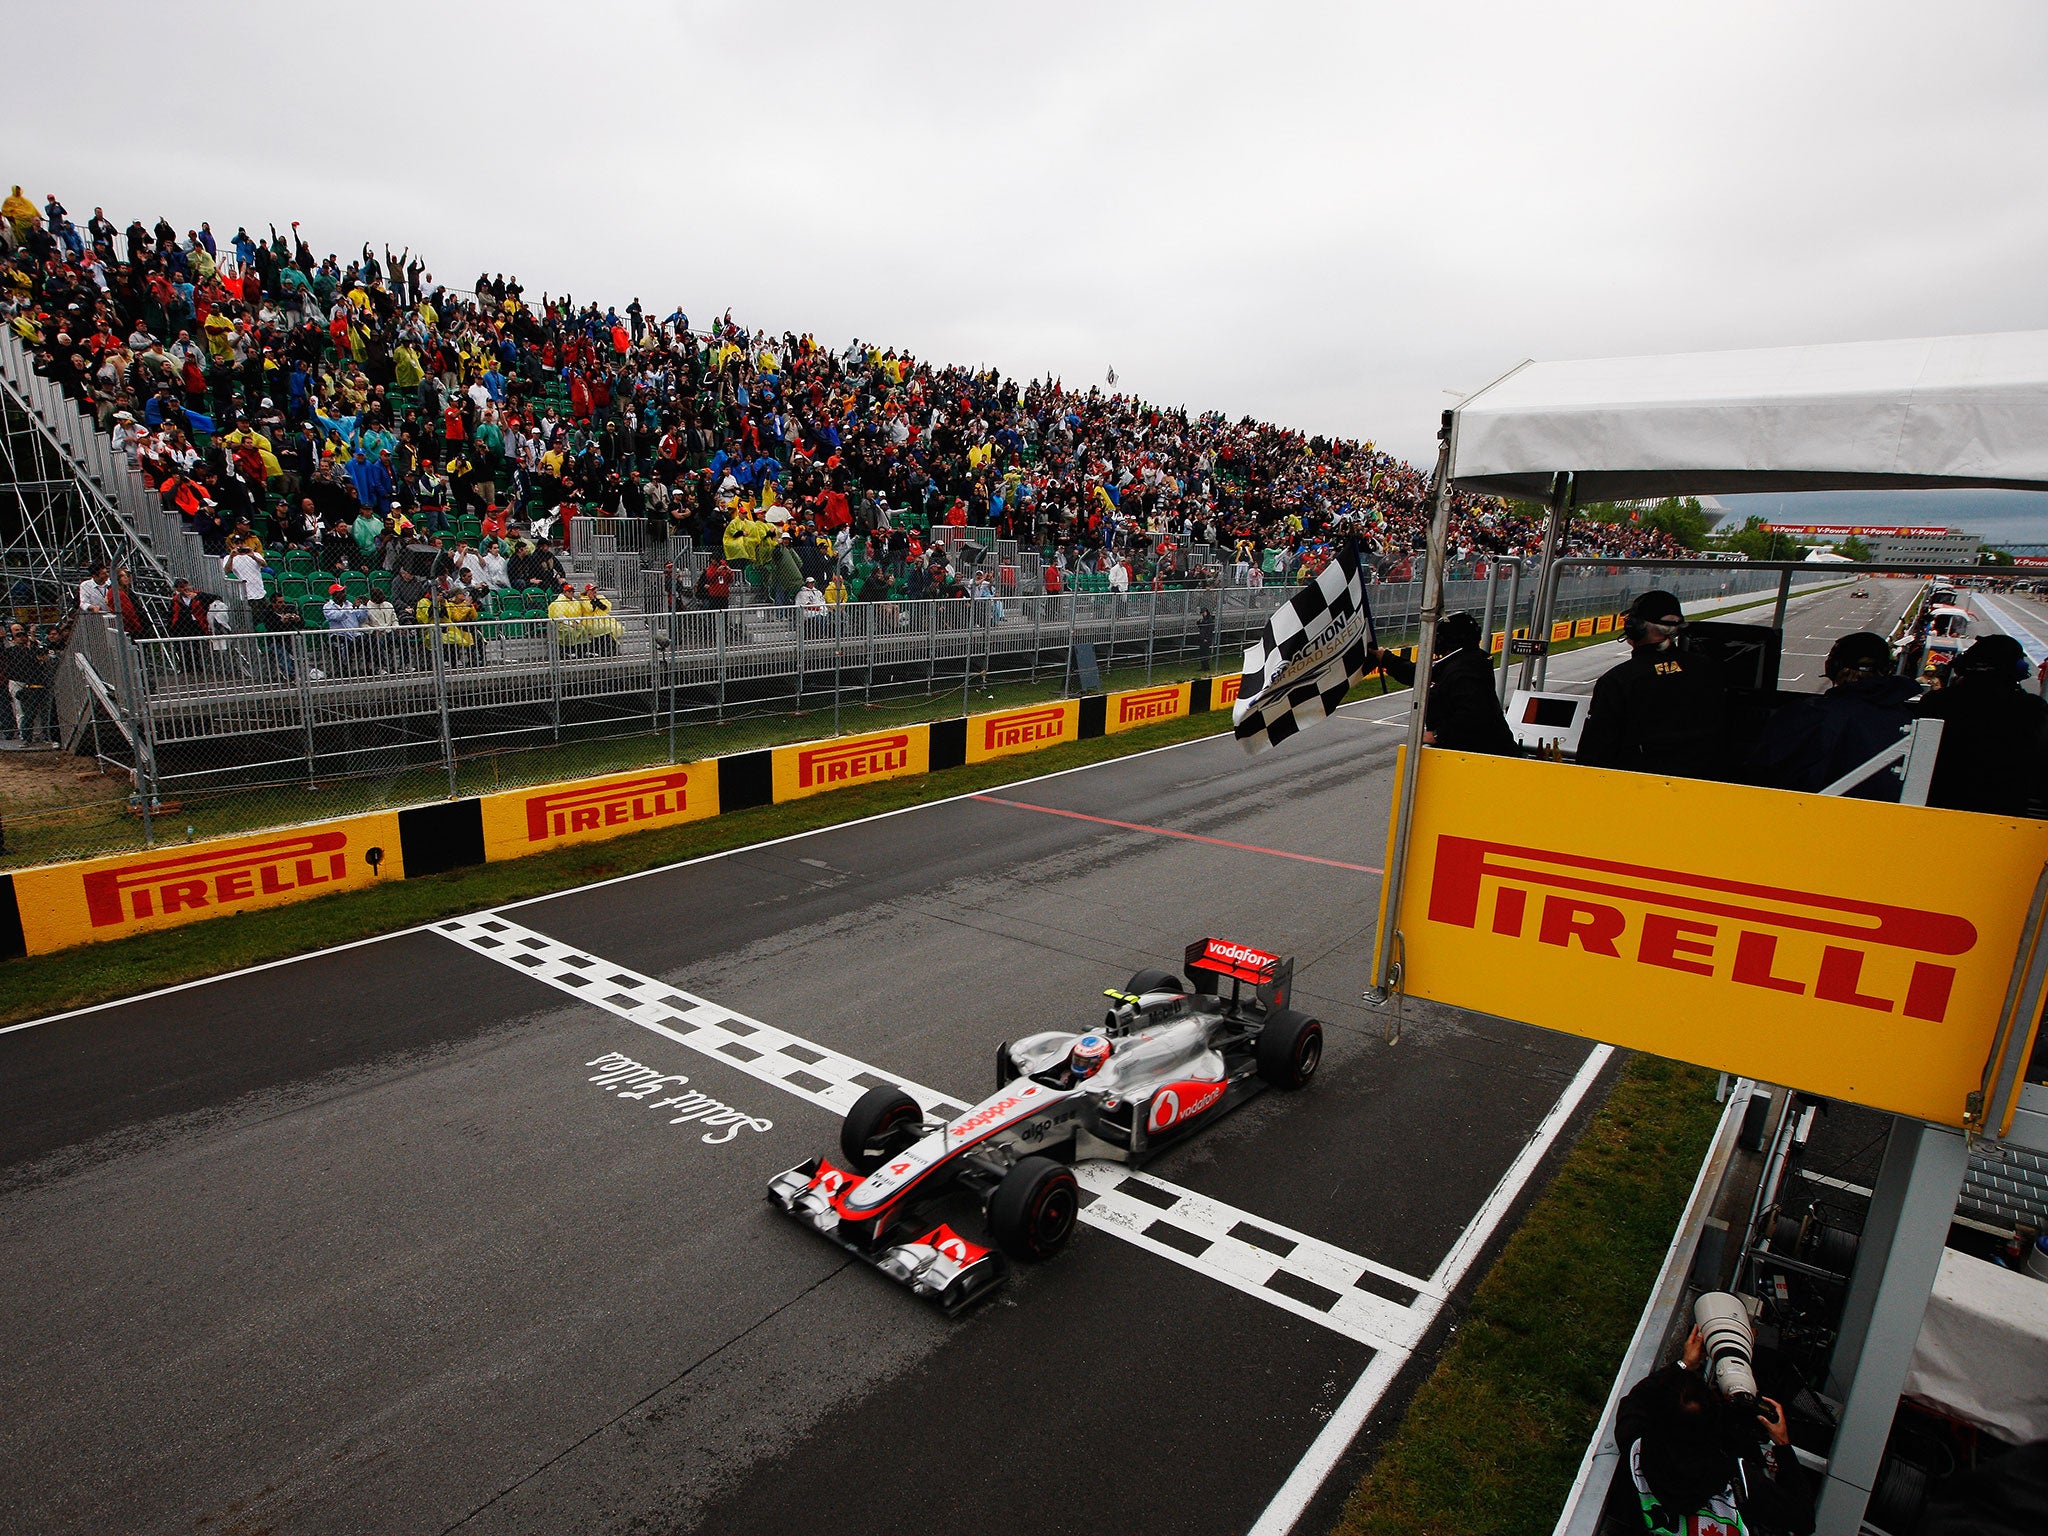 The 2011 Canadian Grand Prix win went down as one of the best ever F1 races